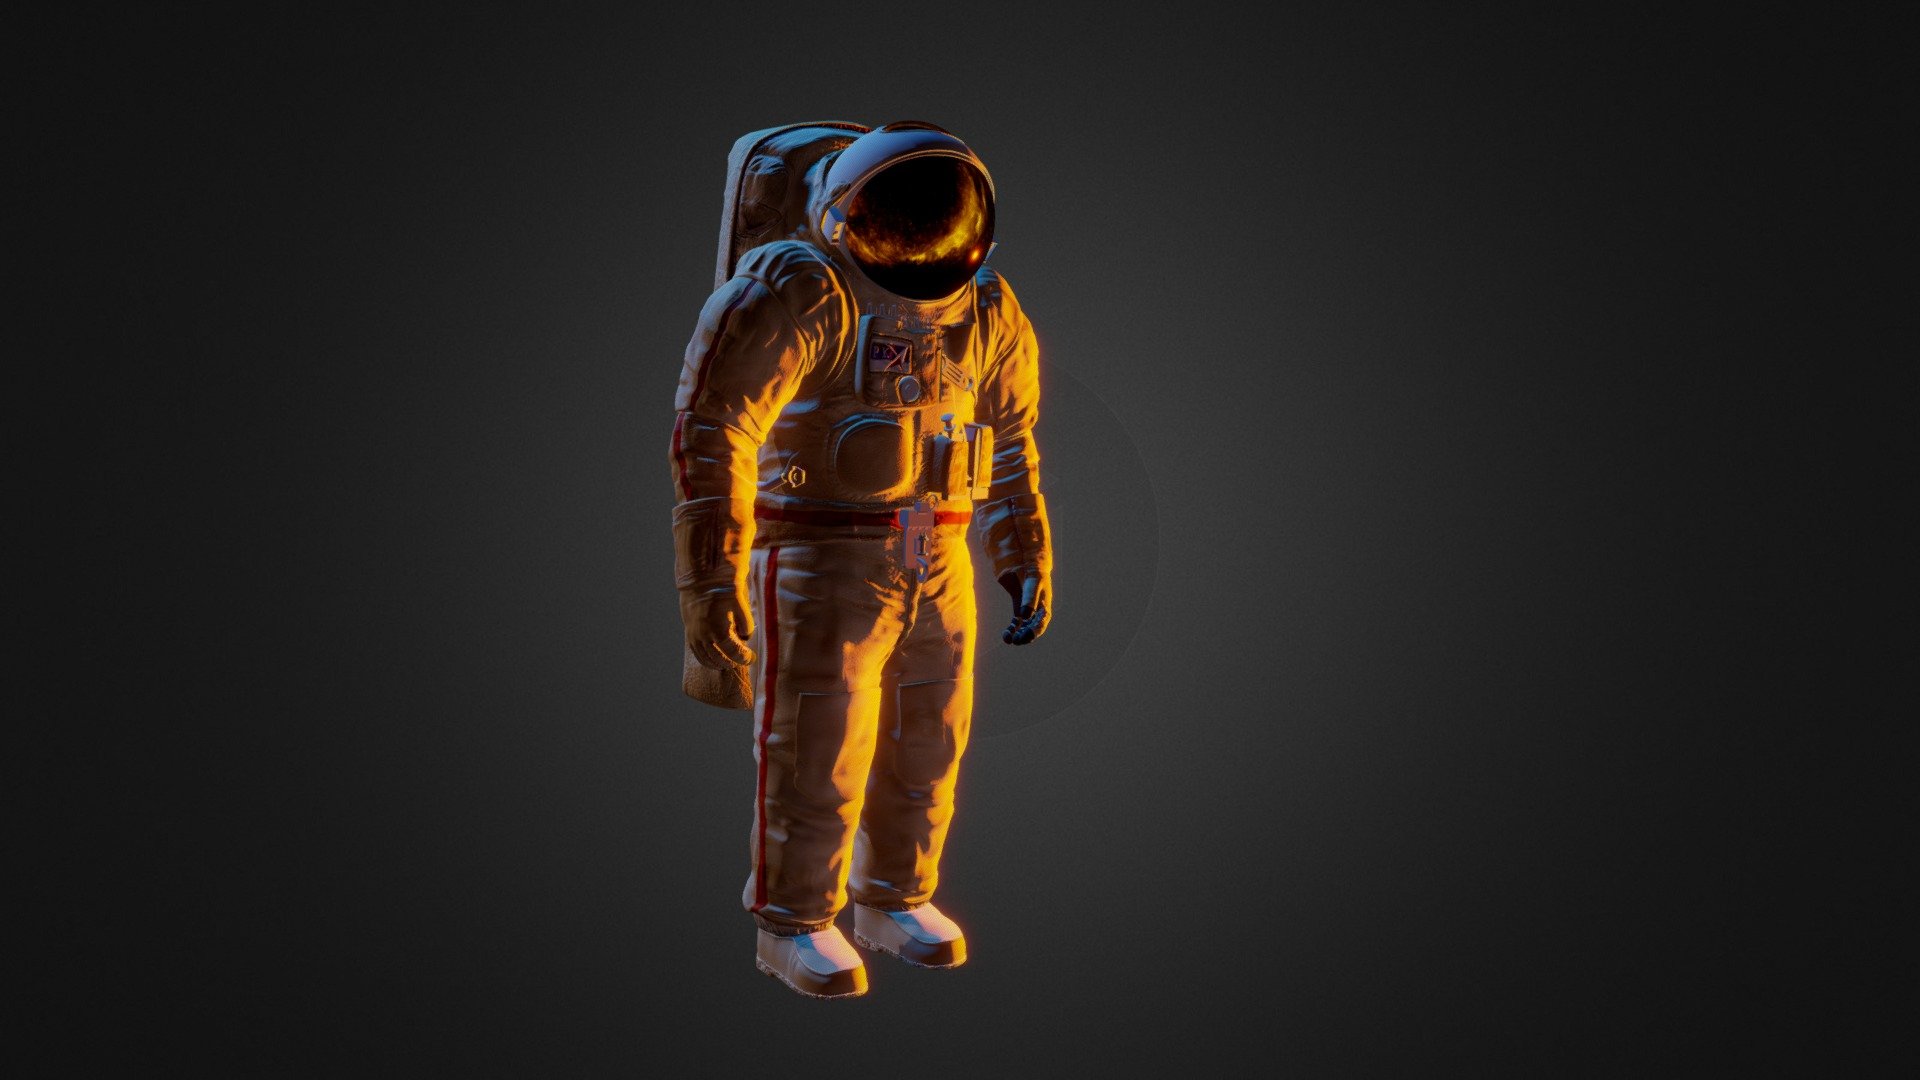 Spaceman - Download Free 3D model by unreadble [6926a4f] - Sketchfab